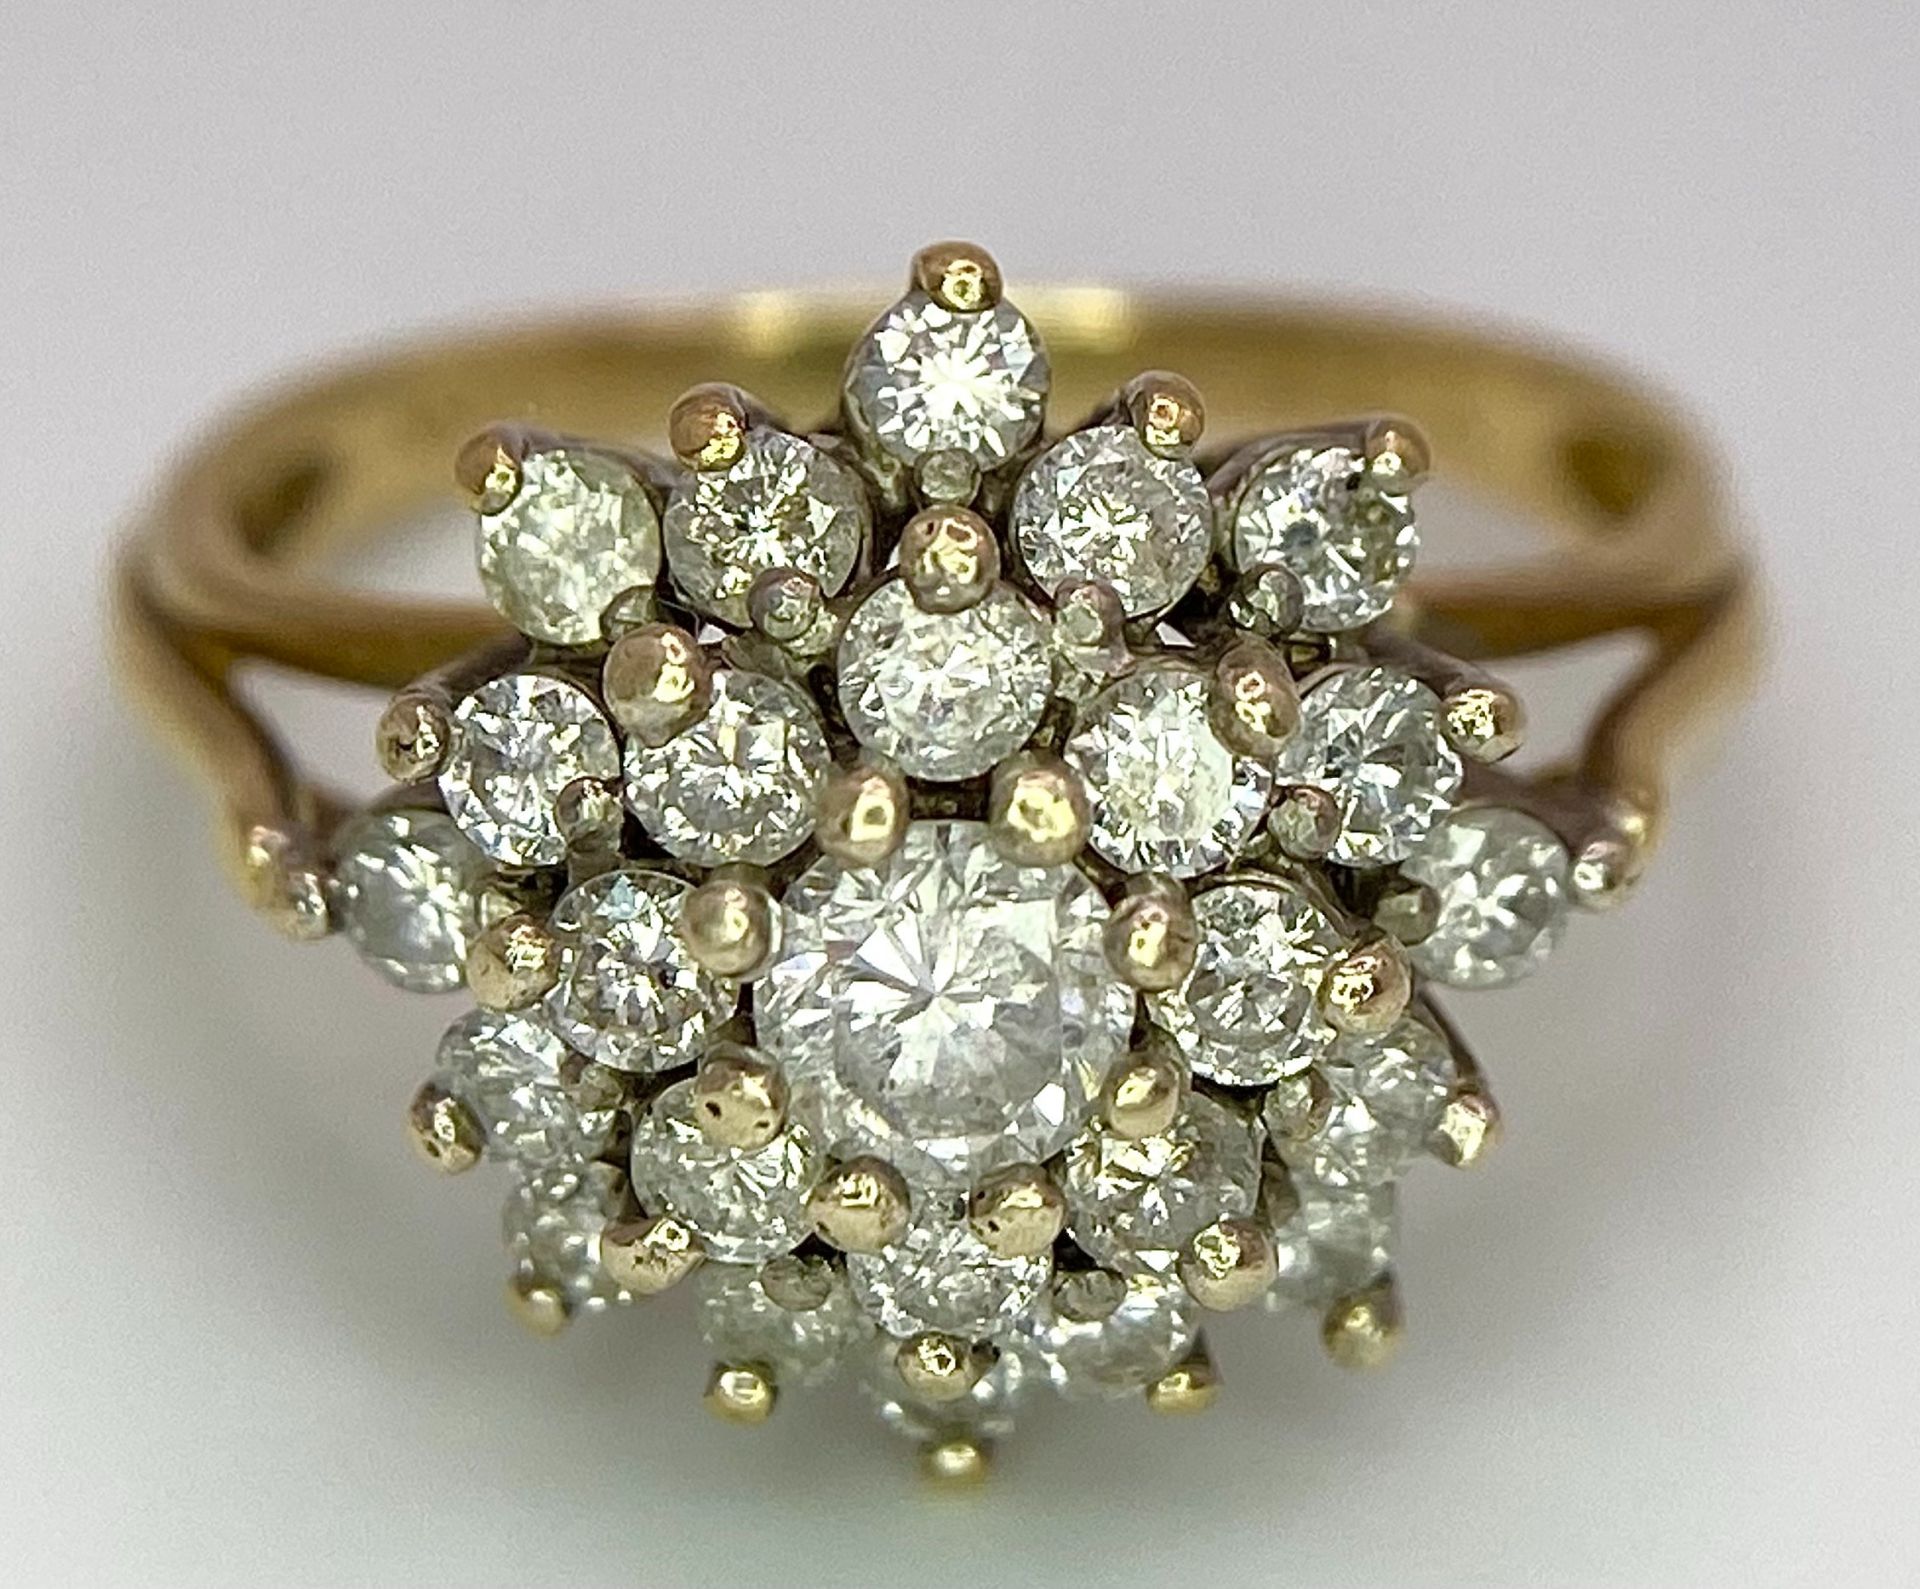 AN 18K YELLOW GOLD DIAMOND CLUSTER RING - 1CTW. 4.2G. SIZE L 1/2. - Image 3 of 7